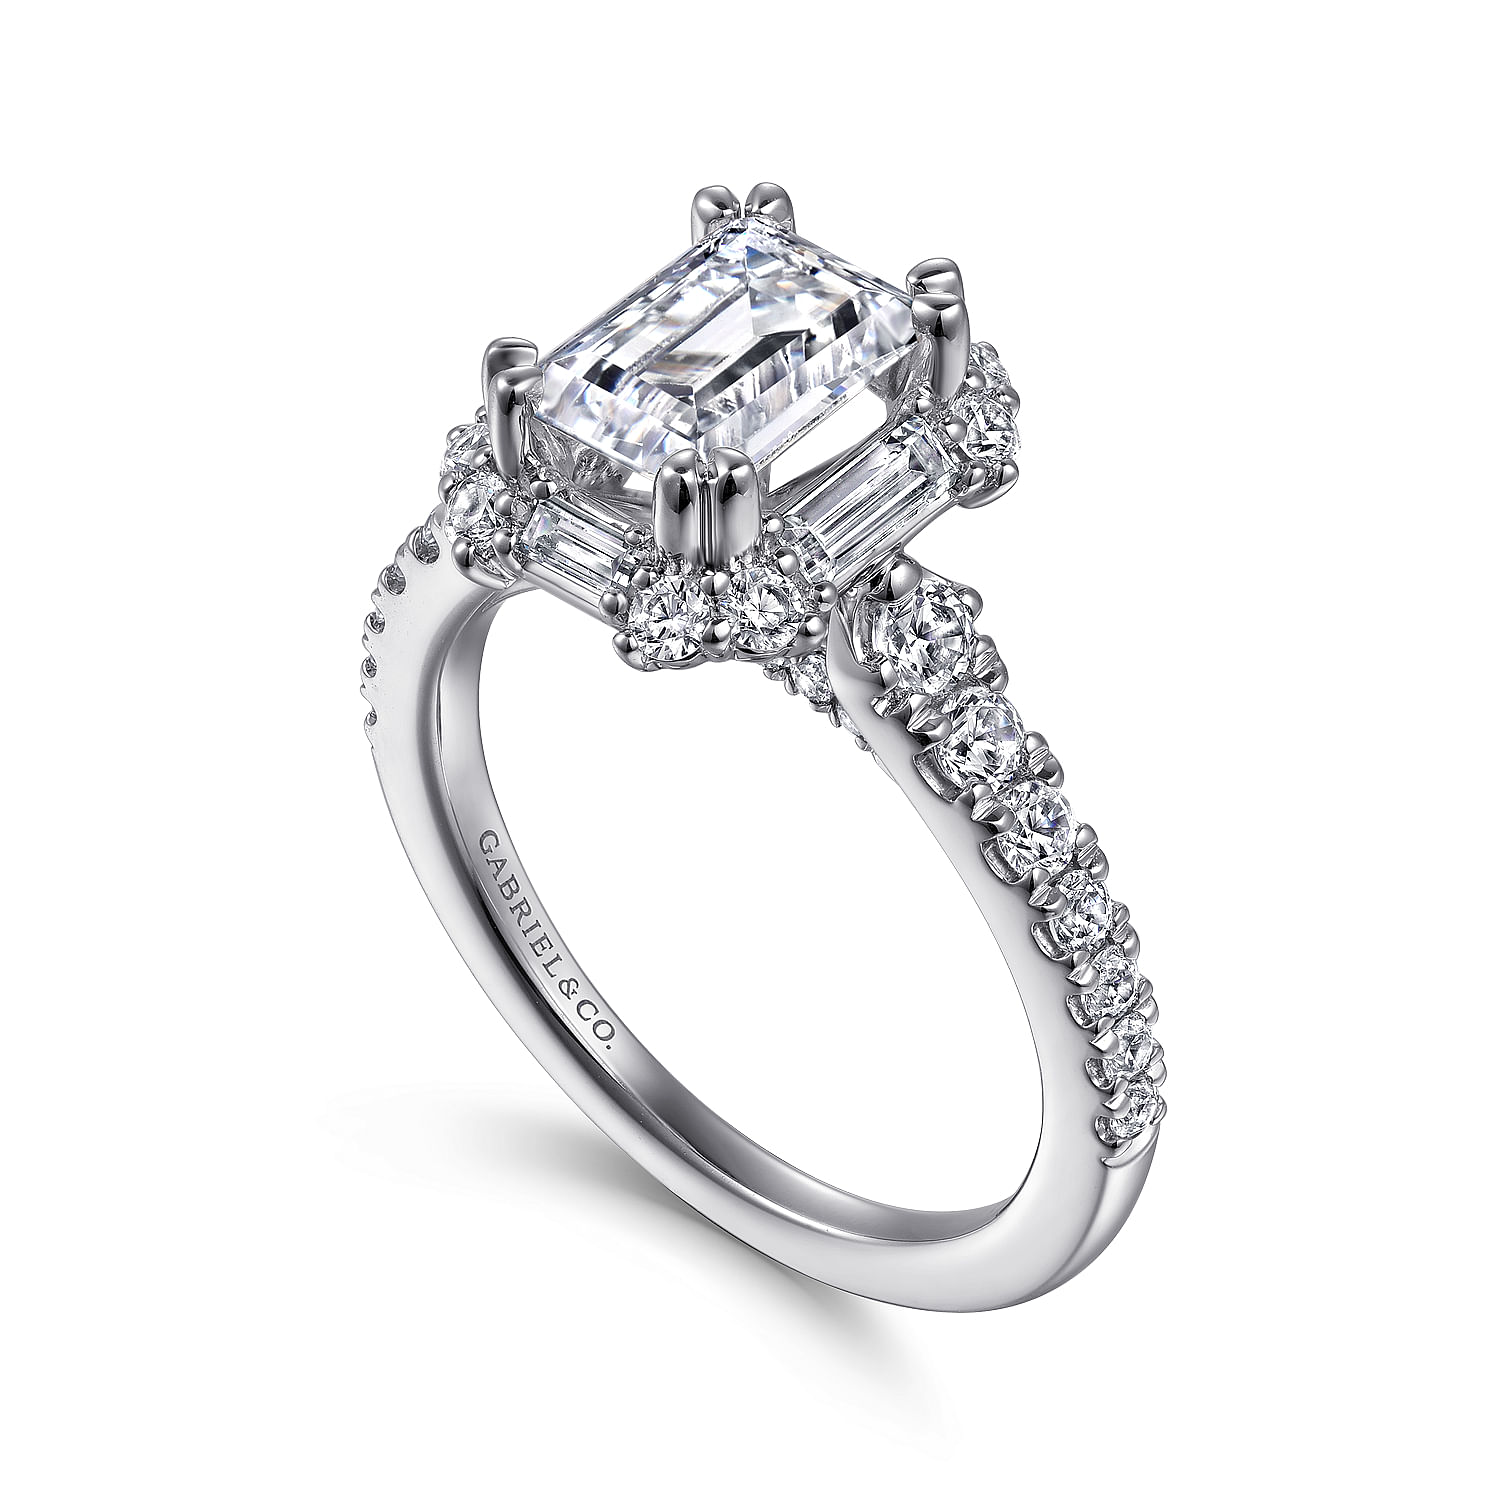 Emerald Cut Engagement Rings: Our Stylish Collection | Gabriel & Co